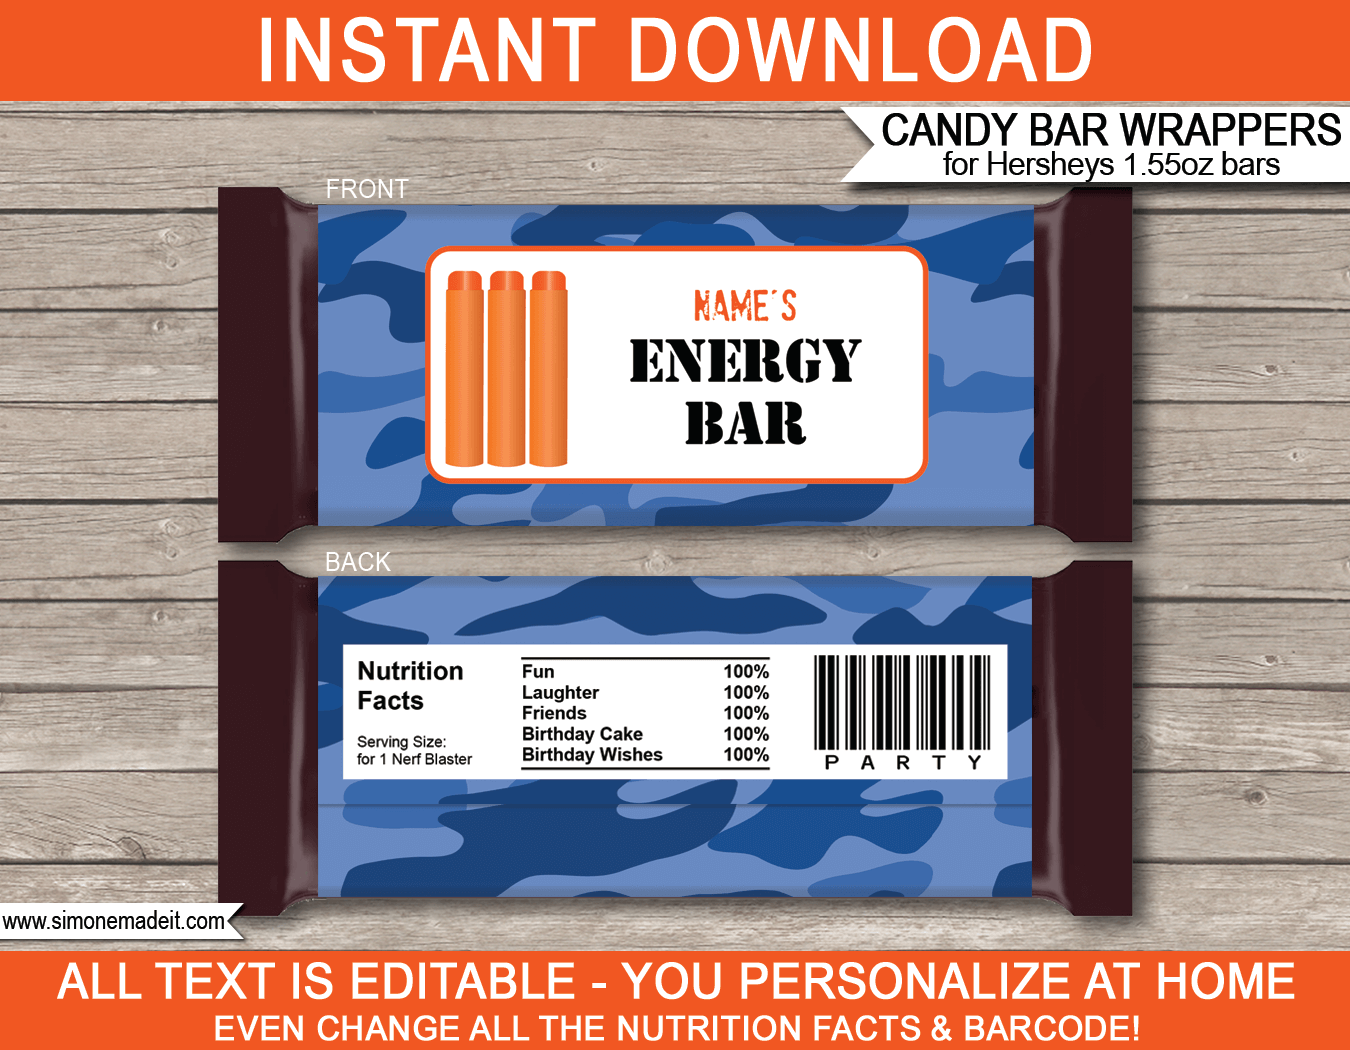 Nerf Hershey Candy Bar Wrappers | Blue Camo | Birthday Party Favors | Personalized Candy Bars | Editable Template | INSTANT DOWNLOAD $3.00 via simonemadeit.com